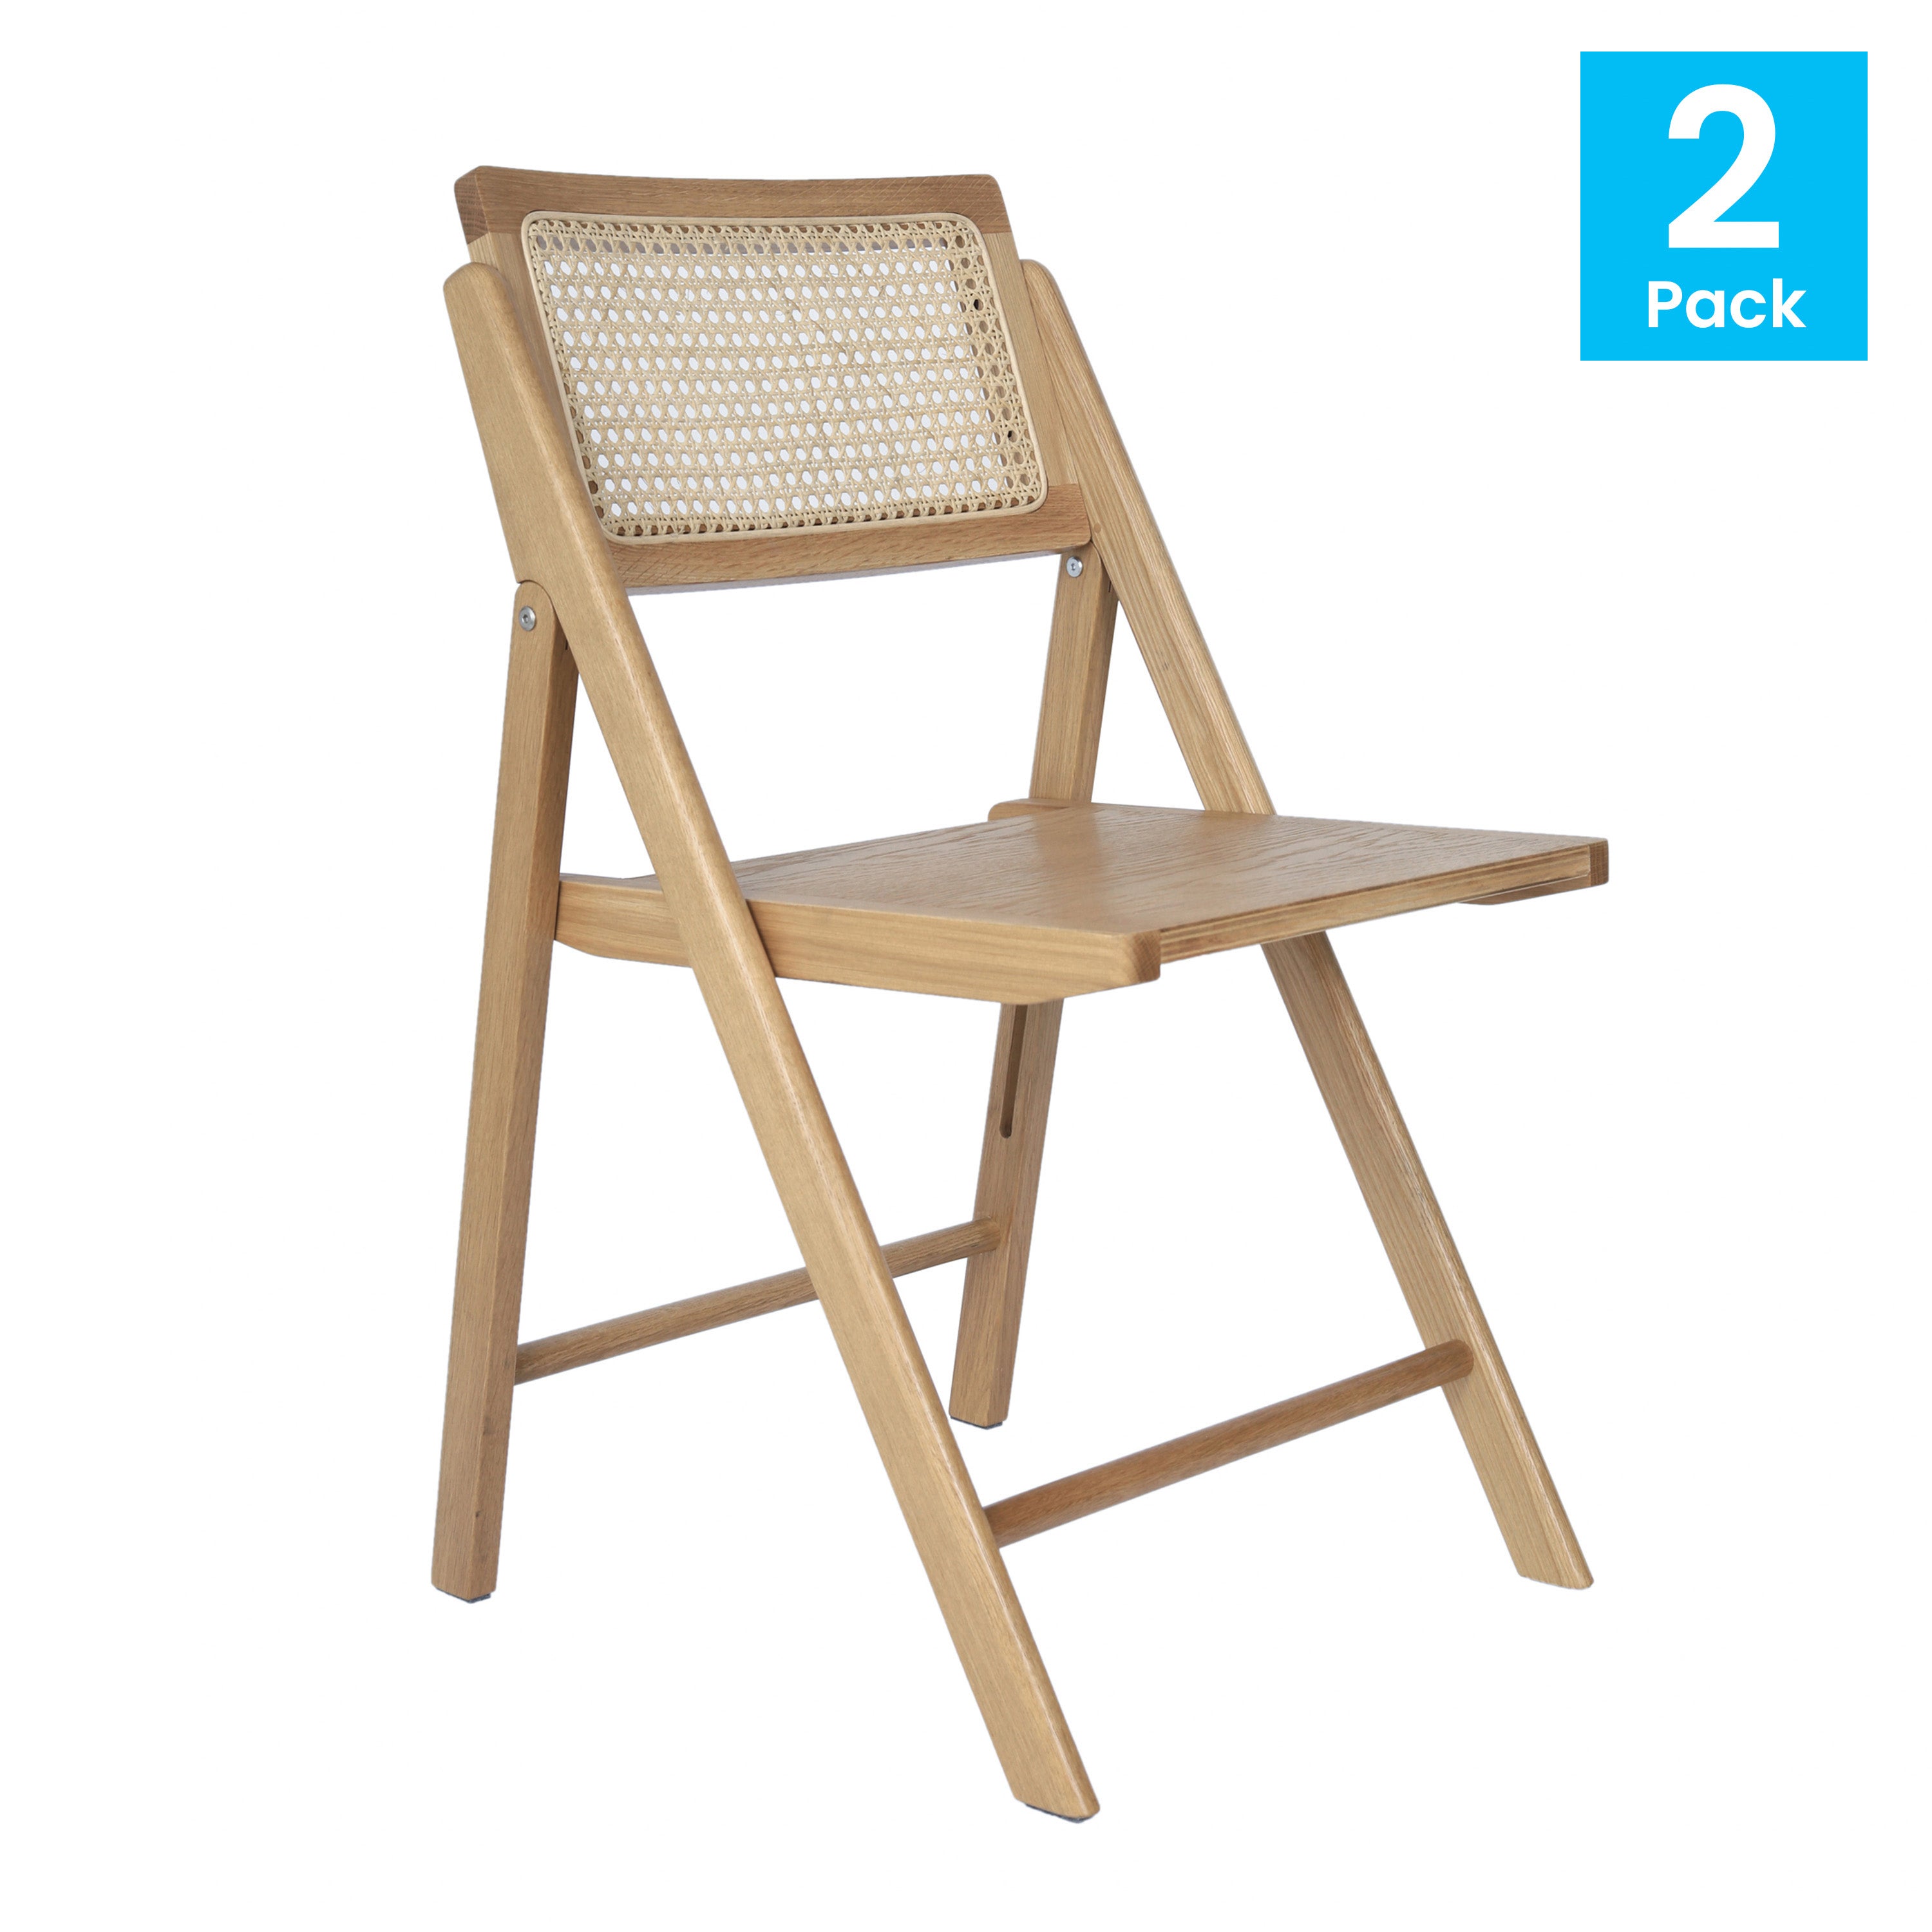 Galene Set of 2 Cane Rattan Folding Chairs with Solid Wood Frame and Seat and Ventilated Back, Perfect for Events or Additional Seating-Folding Chair-Flash Furniture-Wall2Wall Furnishings